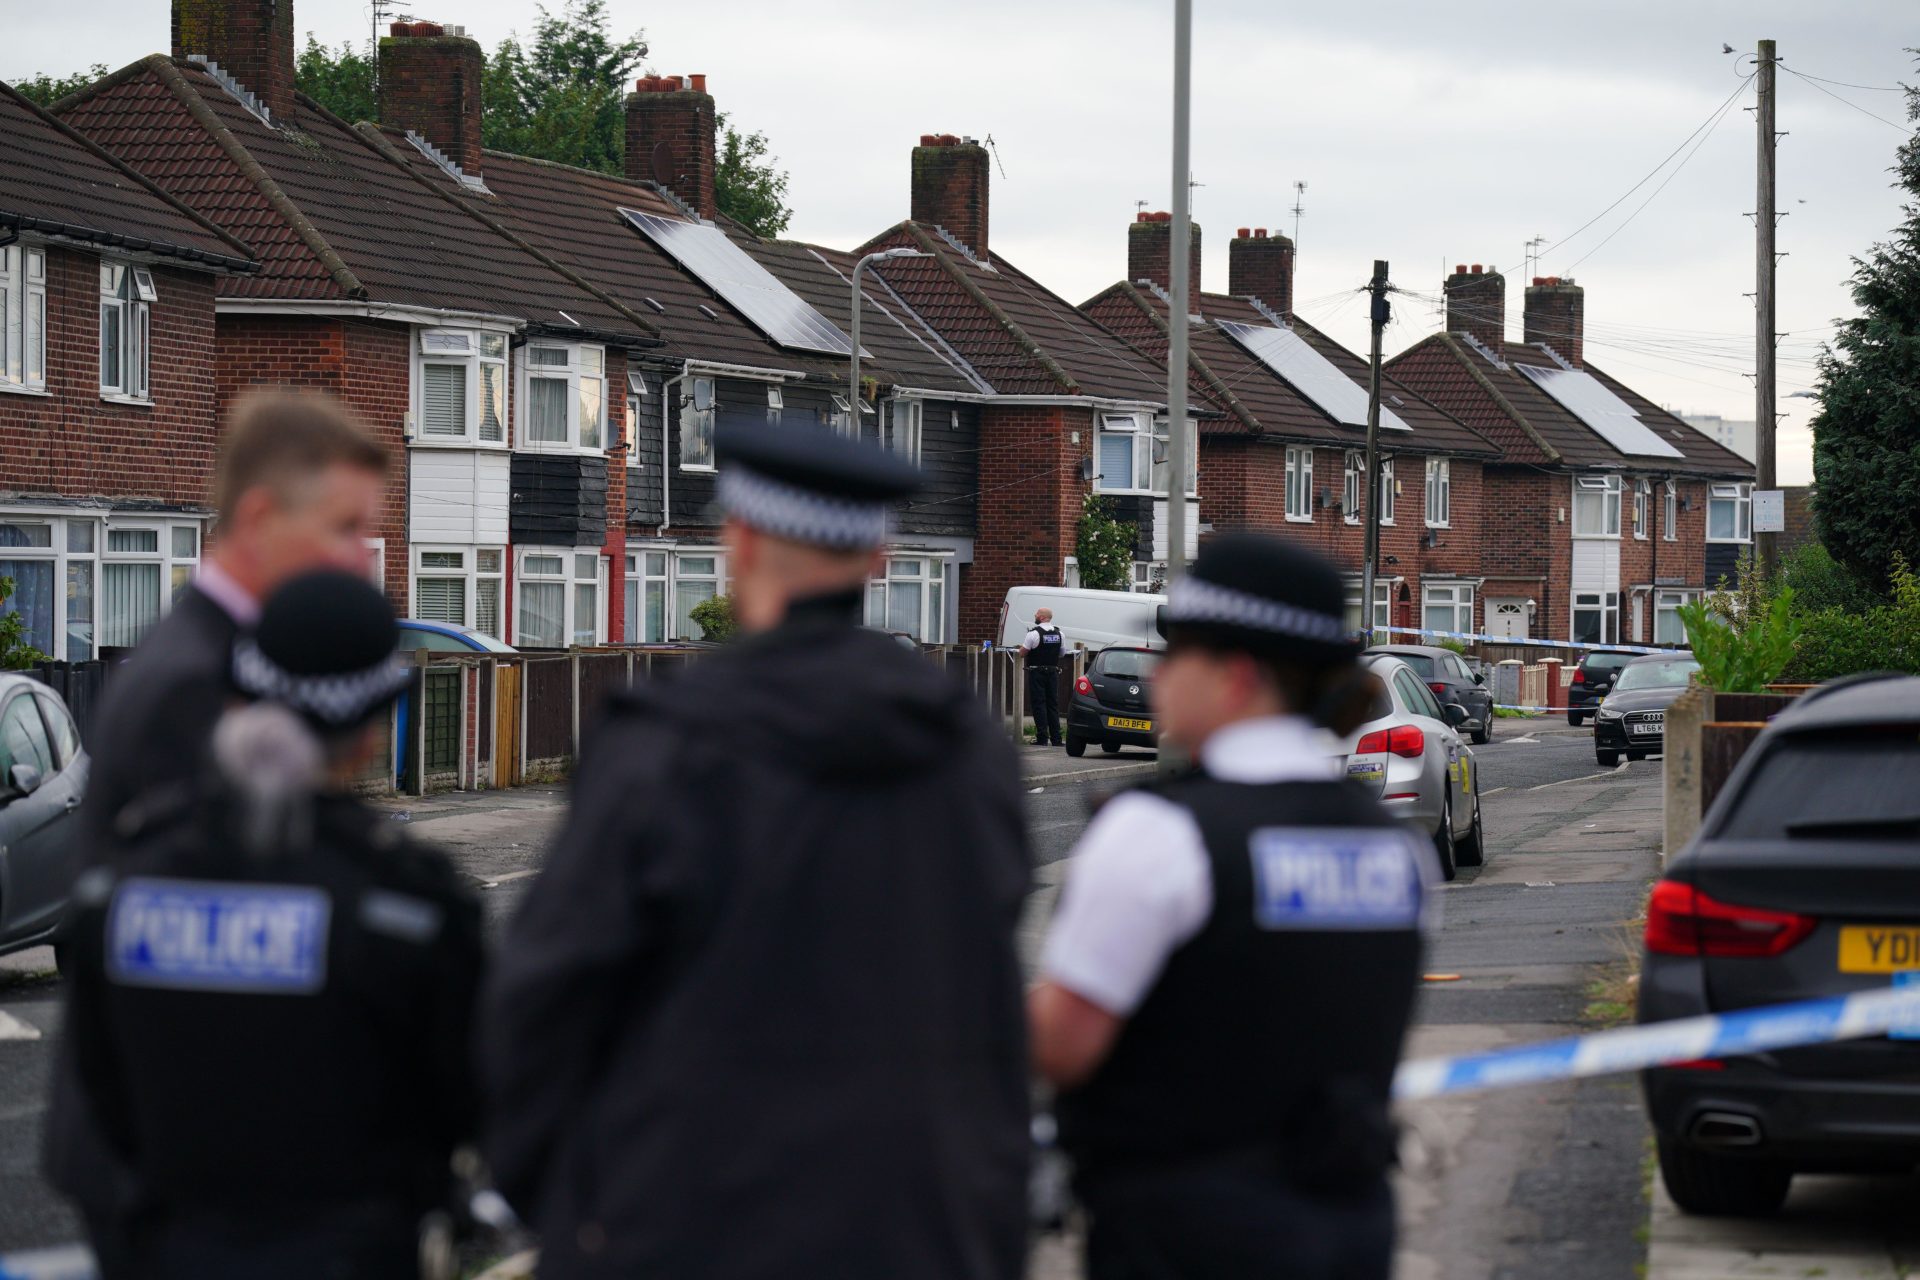 Police at the scene in Knotty Ash, Liverpool, where a nine-year-old girl has been shot dead, 23-08-2022. Image: PA Images / Alamy Stock Photo